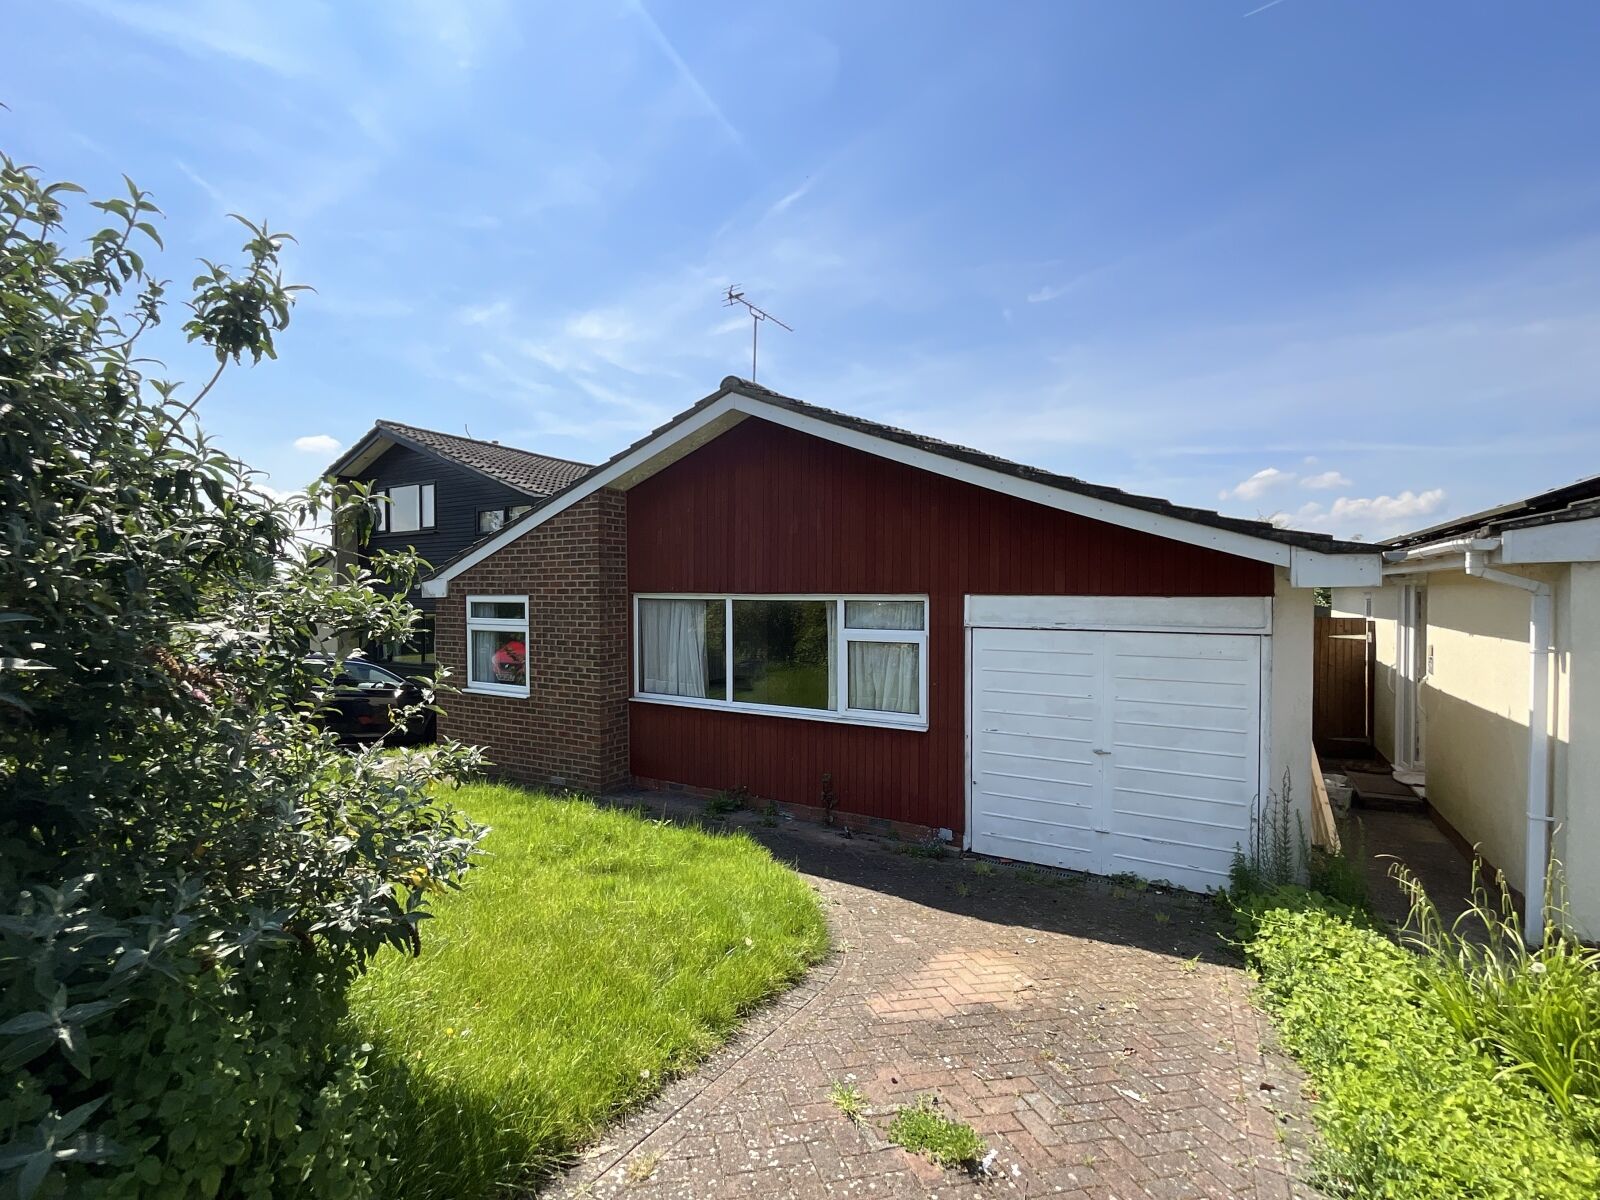 2 bedroom detached bungalow for sale Wessex Gardens, Twyford, RG10, main image